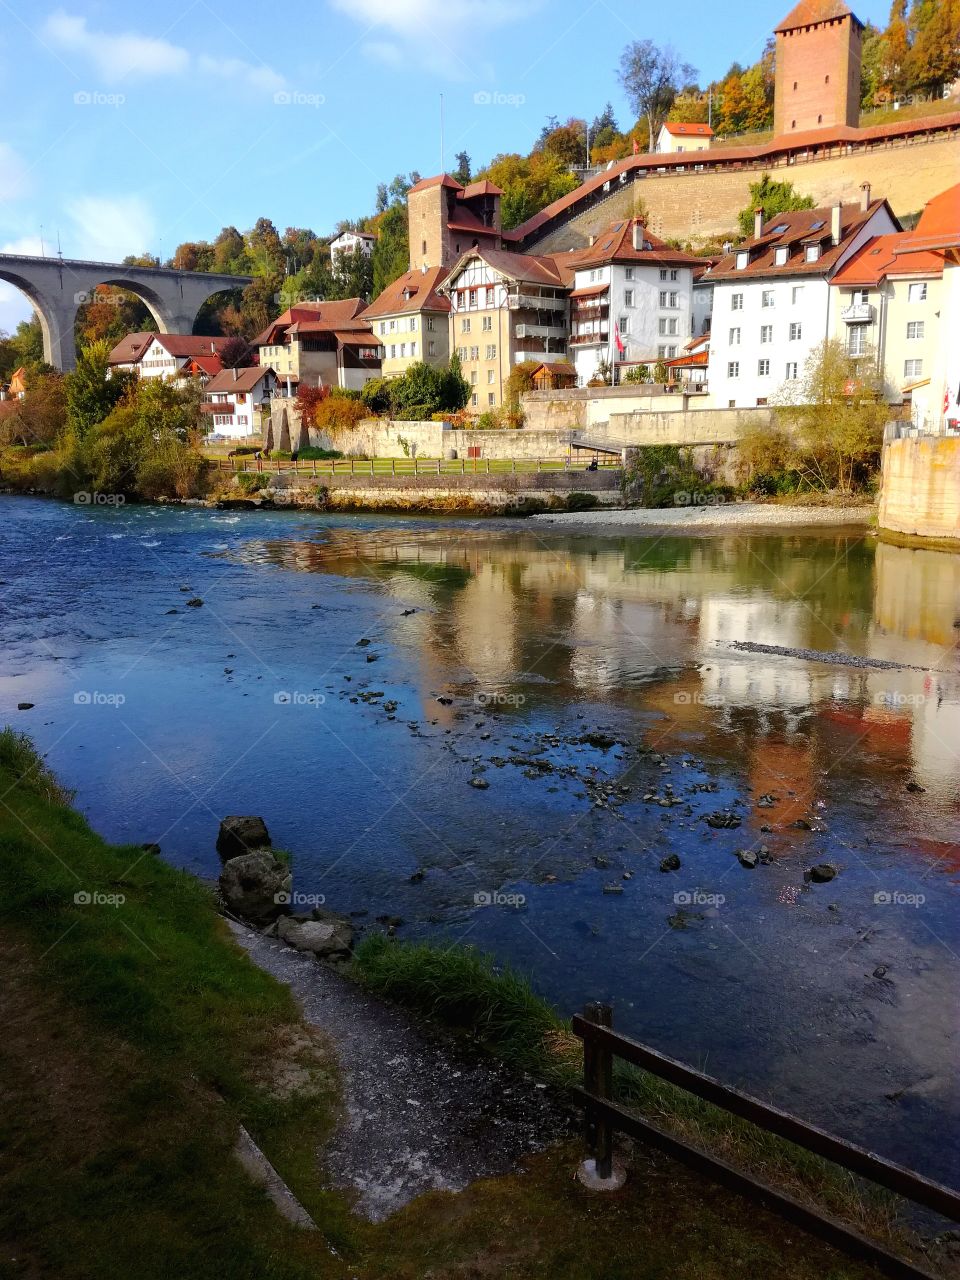 Picture taken in Fribourg, Swizerland